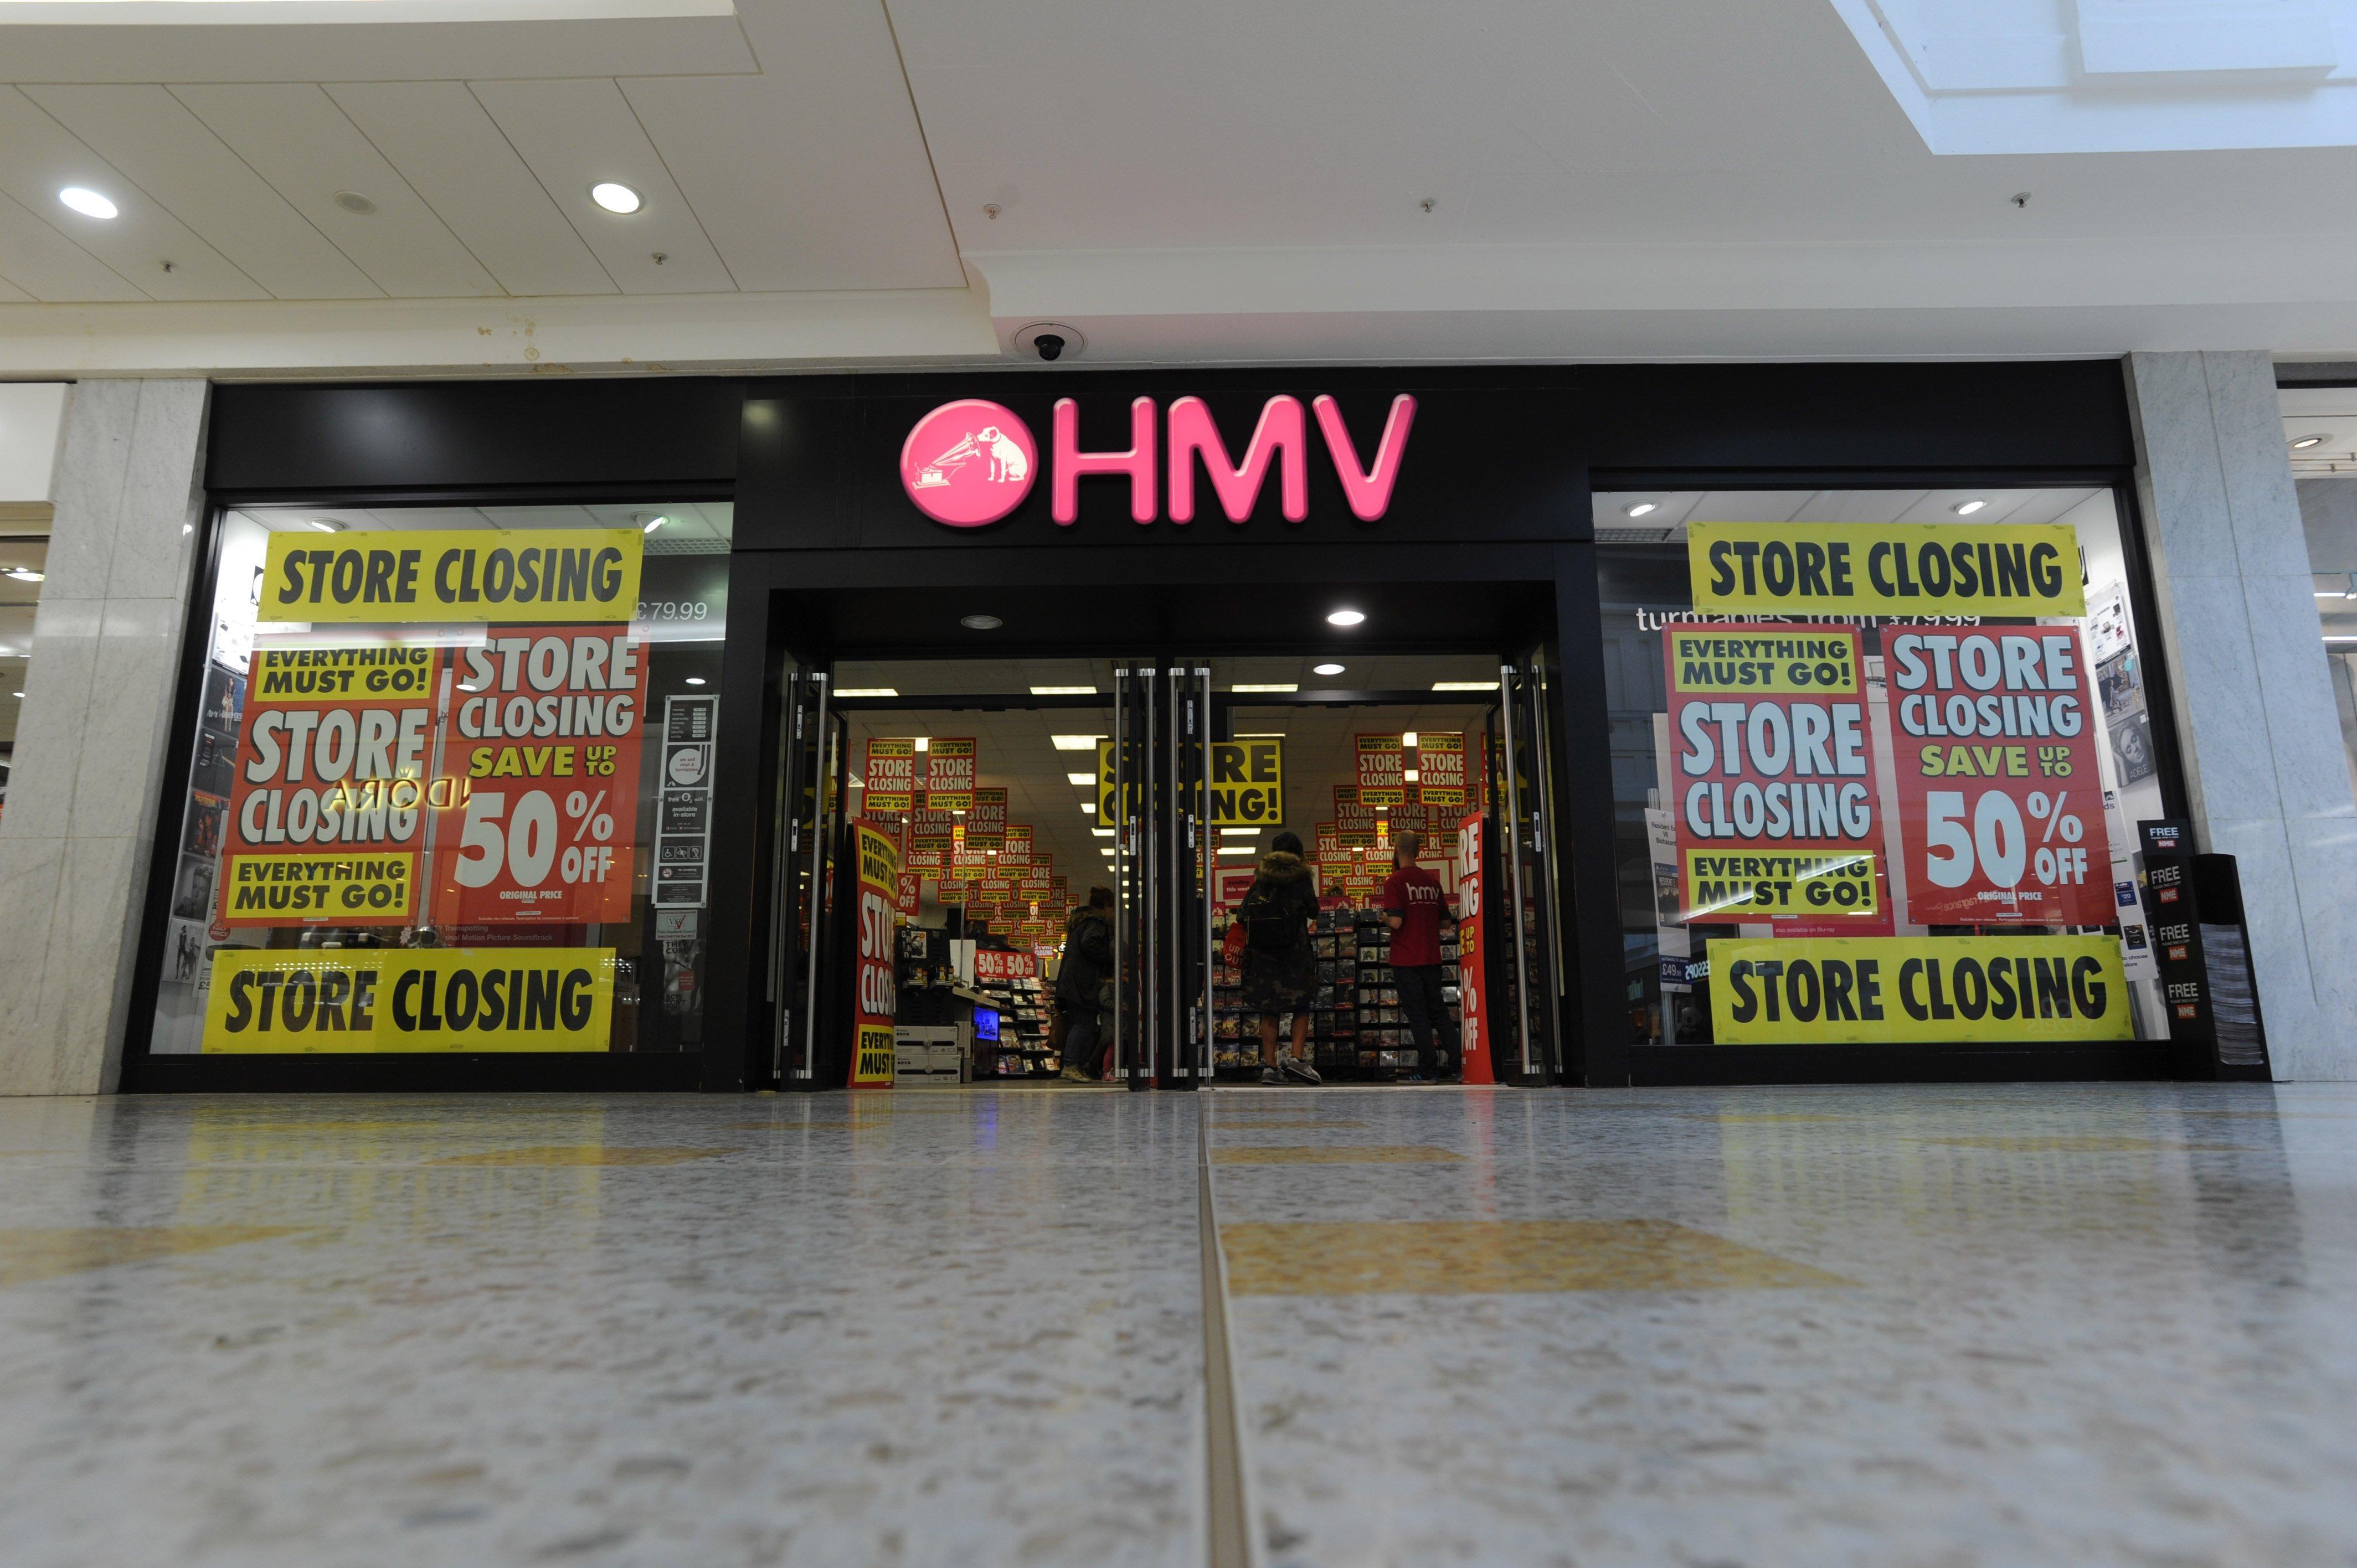 HMV closed in the old Arndale Centre in 2017 (Photo by Jon Rigby)